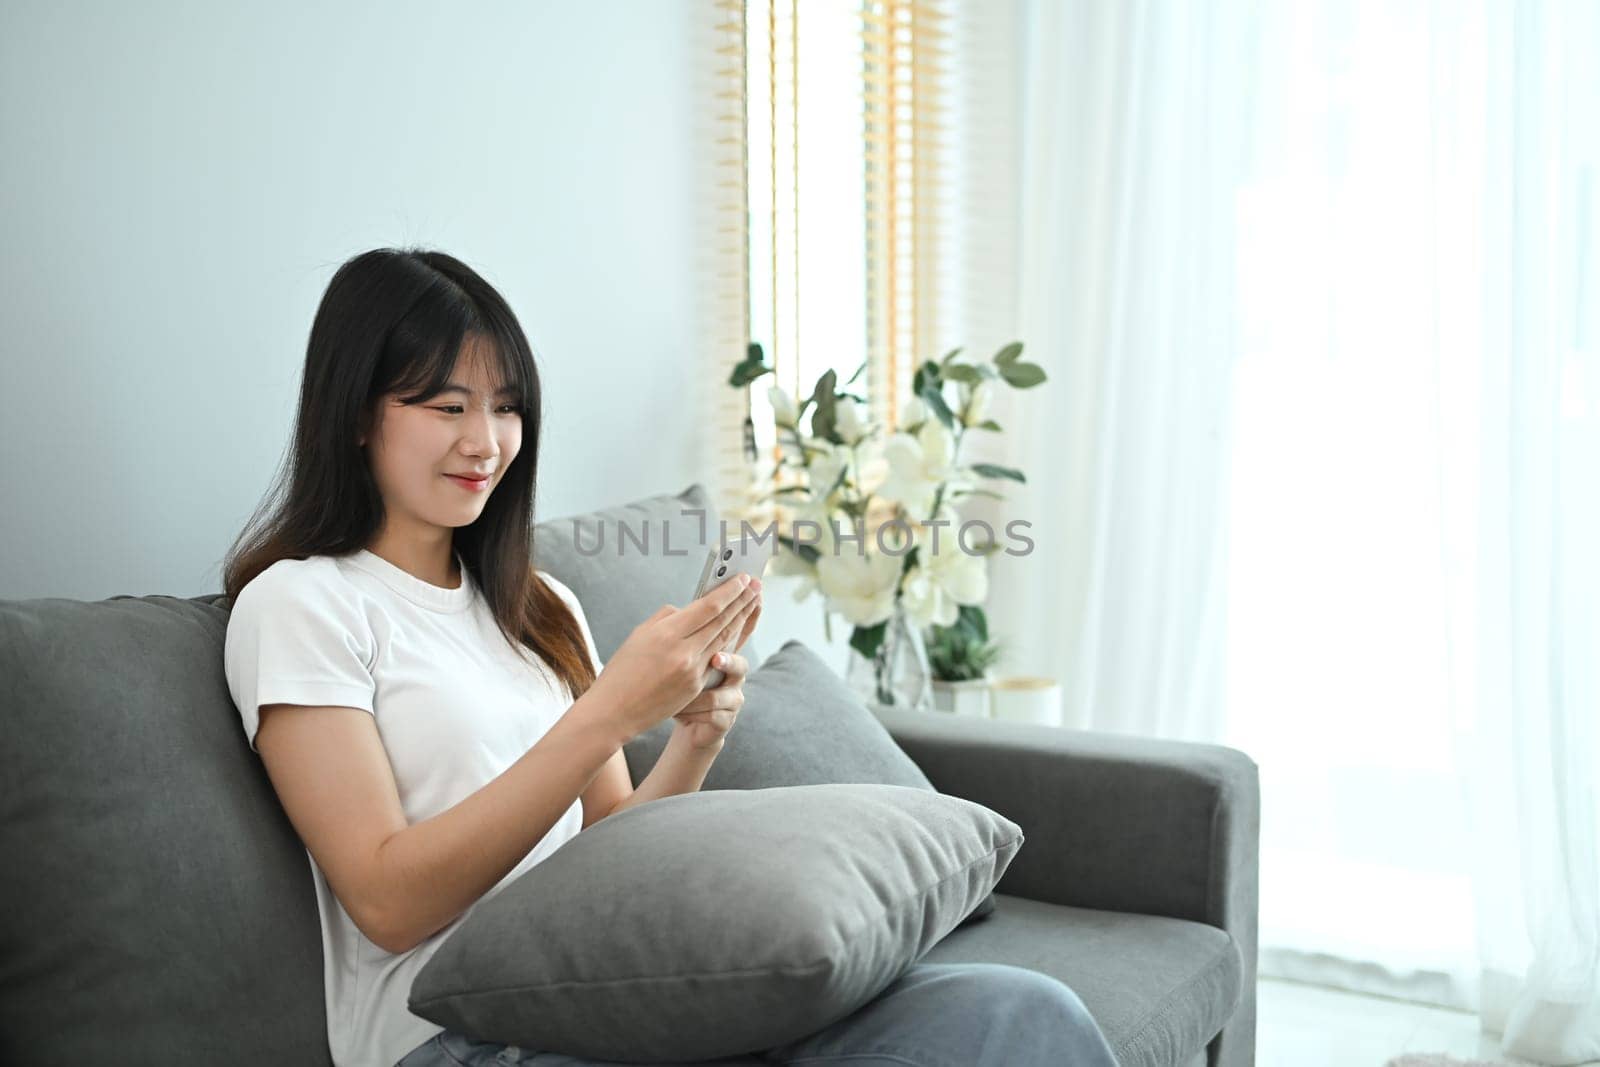 Beautiful young woman using smart phone for social media while sitting on couch.